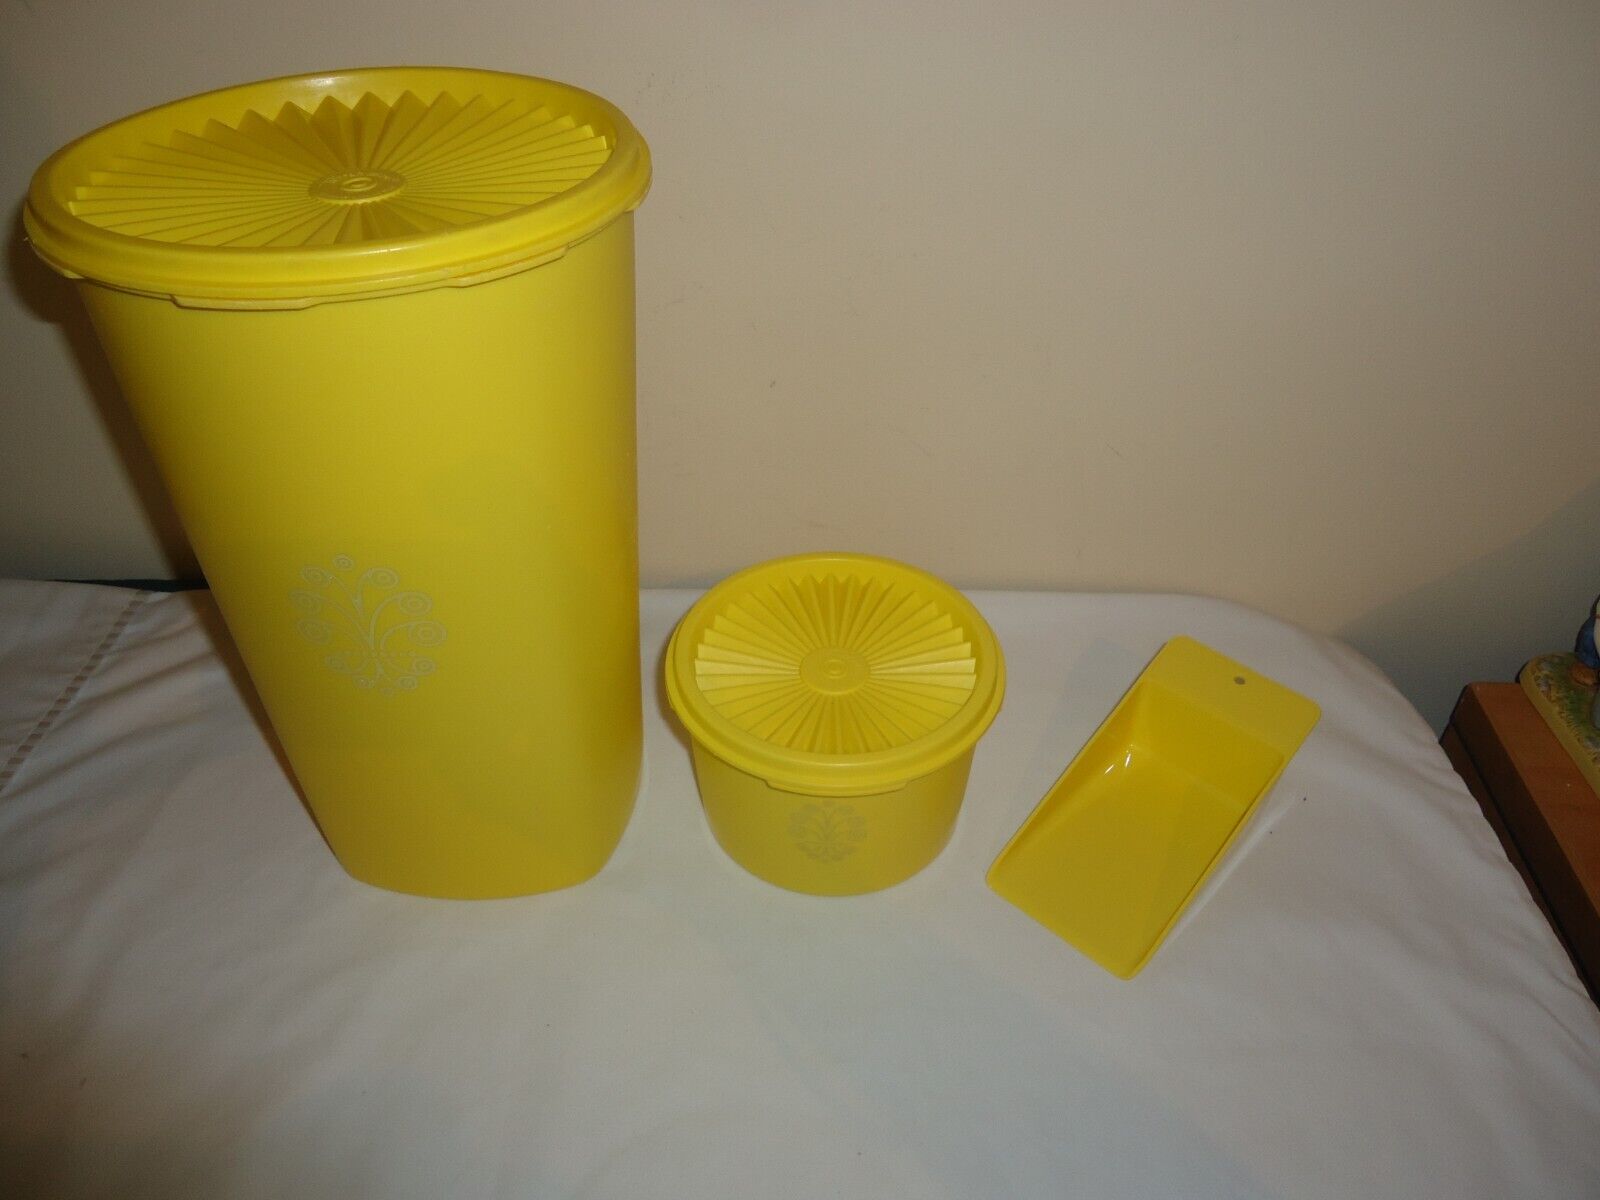 Lot of 2 Vintage Tupperware Yellow Servalier Canisters #1222 & #1297 Plus Scoop